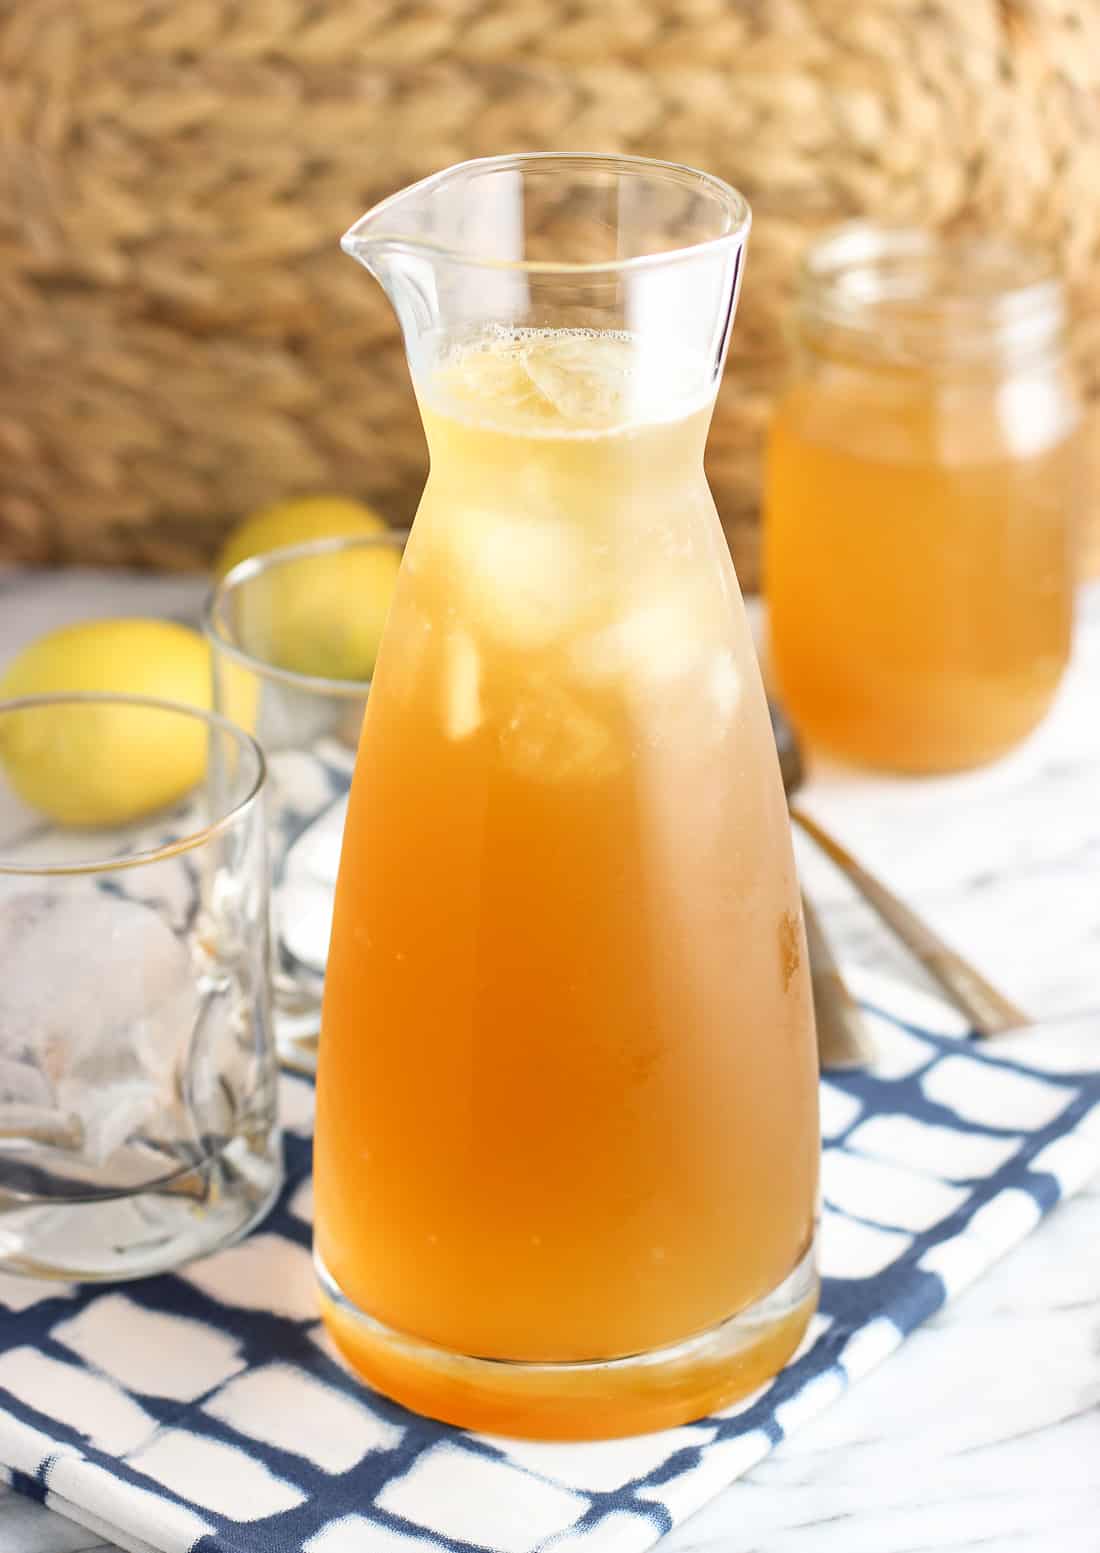 A pitcher of lemon green tea with ice in front of empty glasses, a jar of simple syrup, and two whole lemons